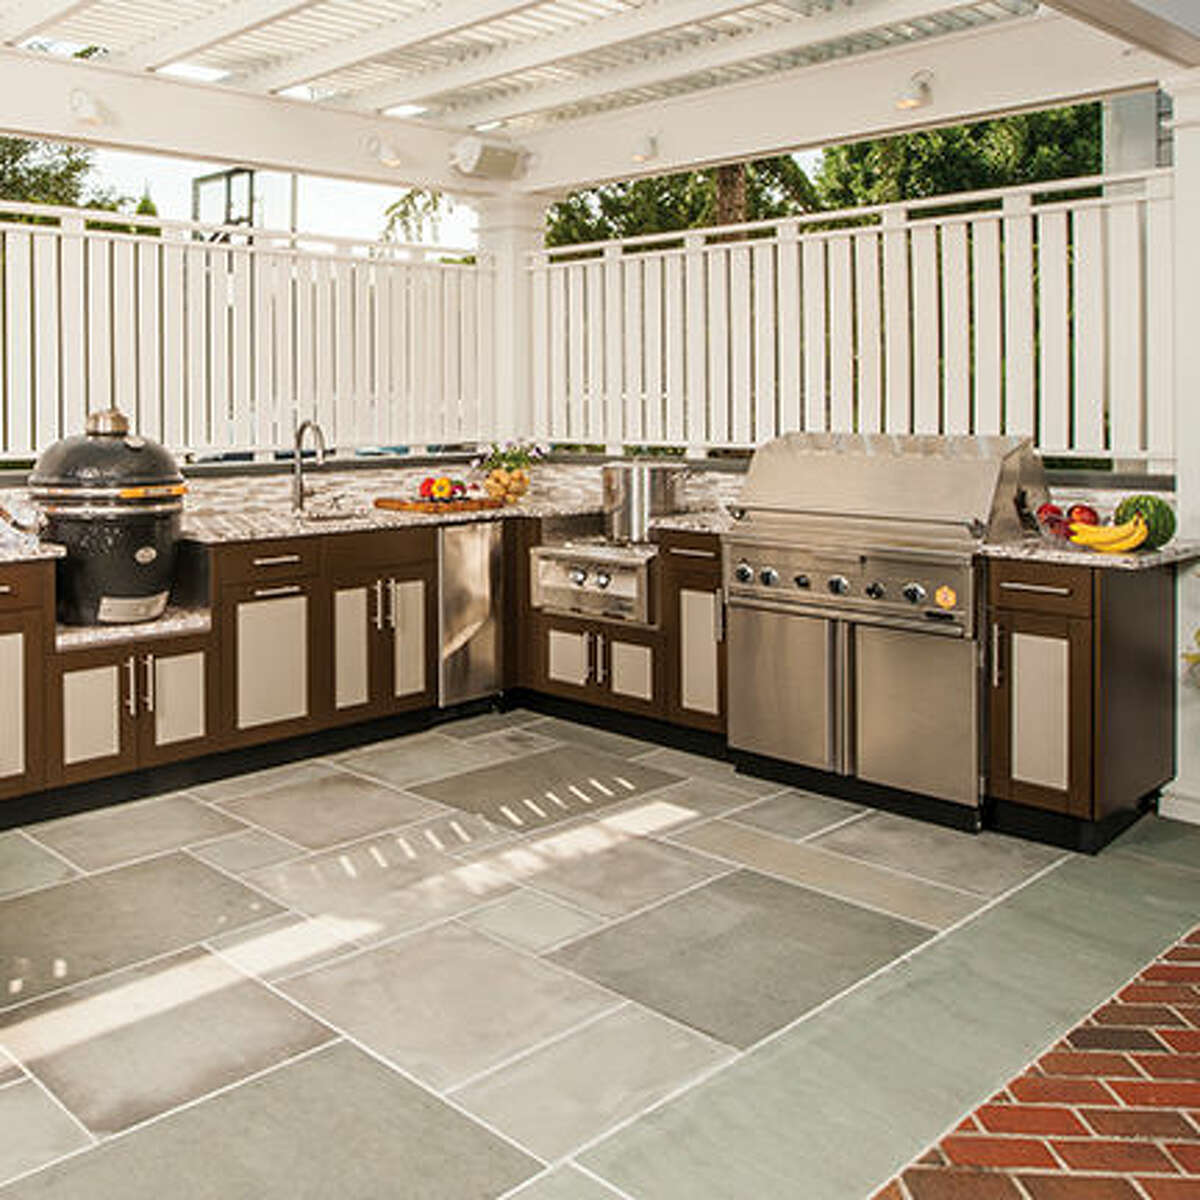 Outdoor Kitchens Add Fun, Function